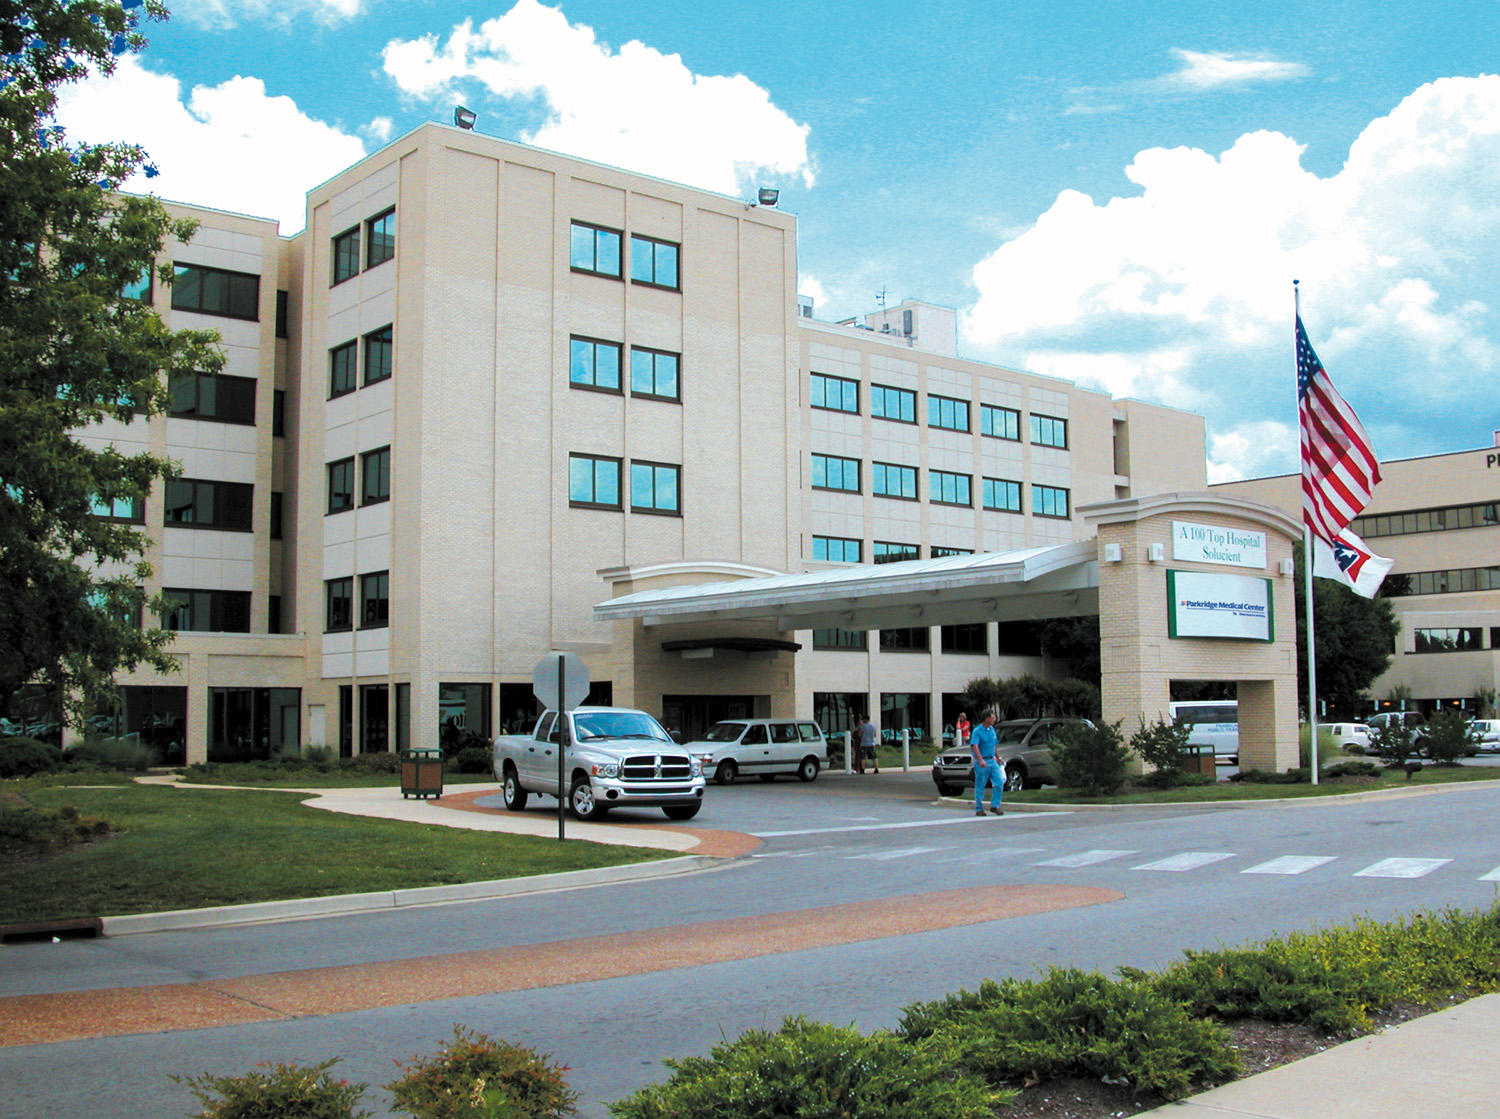 Jobs at parkridge hospital in chattanooga